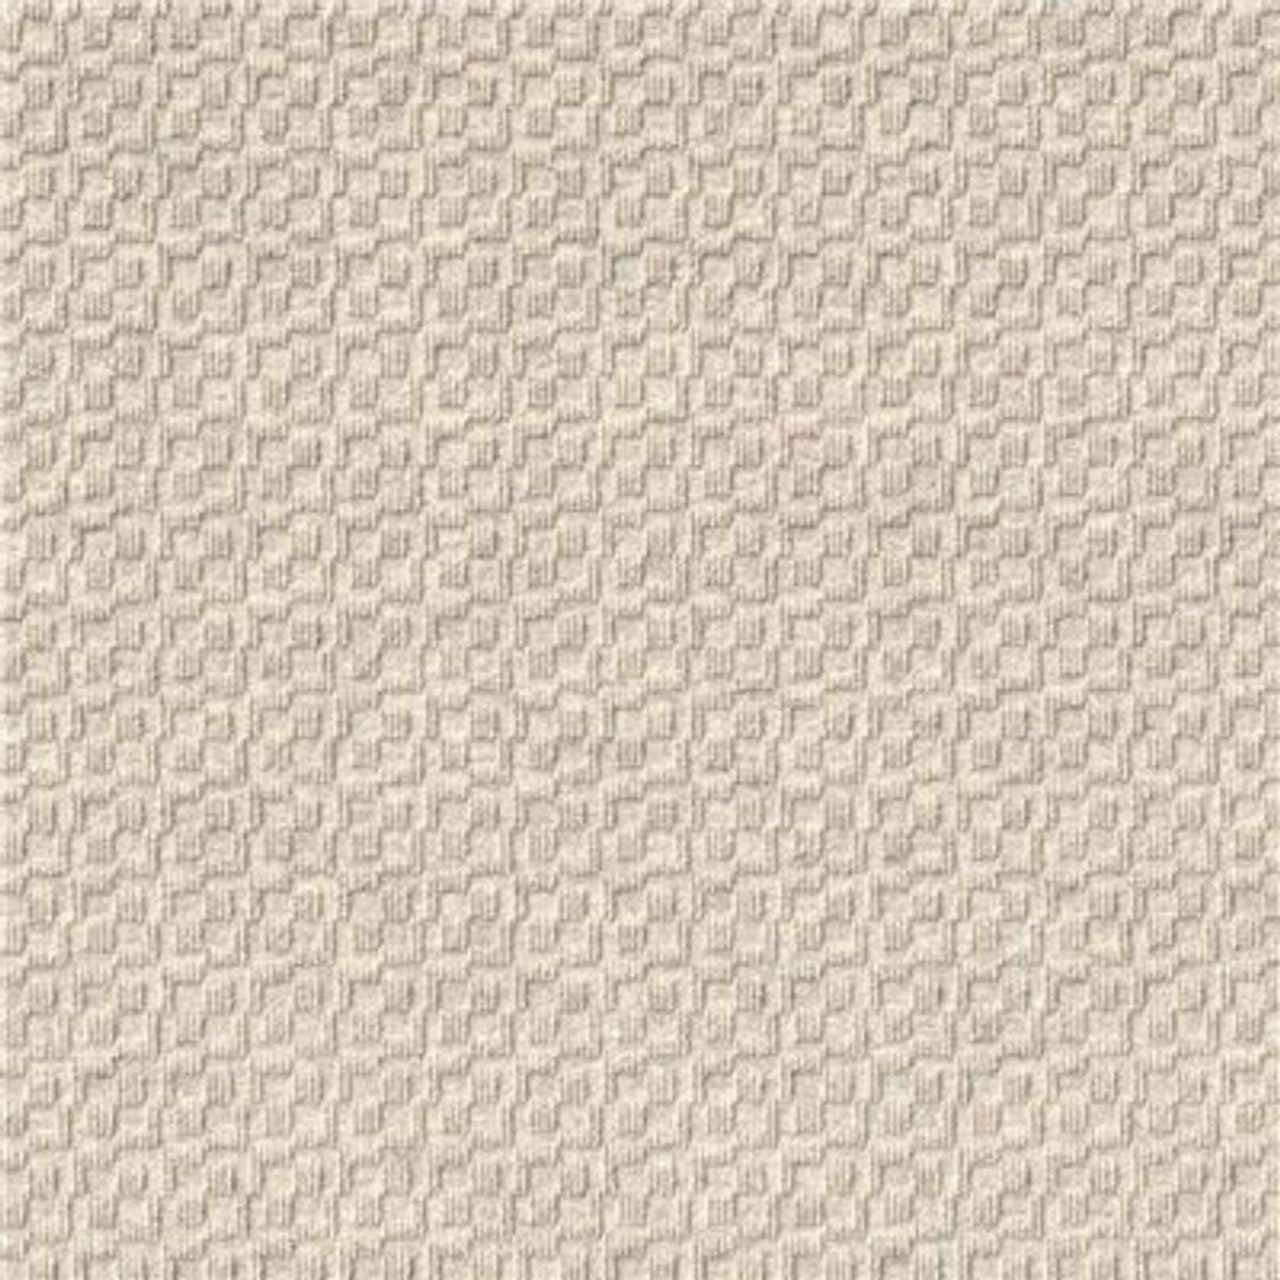 Foss Peel And Stick First Impressions Metropolis Oatmeal 24 In. X 24 In. Commercial Carpet Tile (15 Tiles/Case)